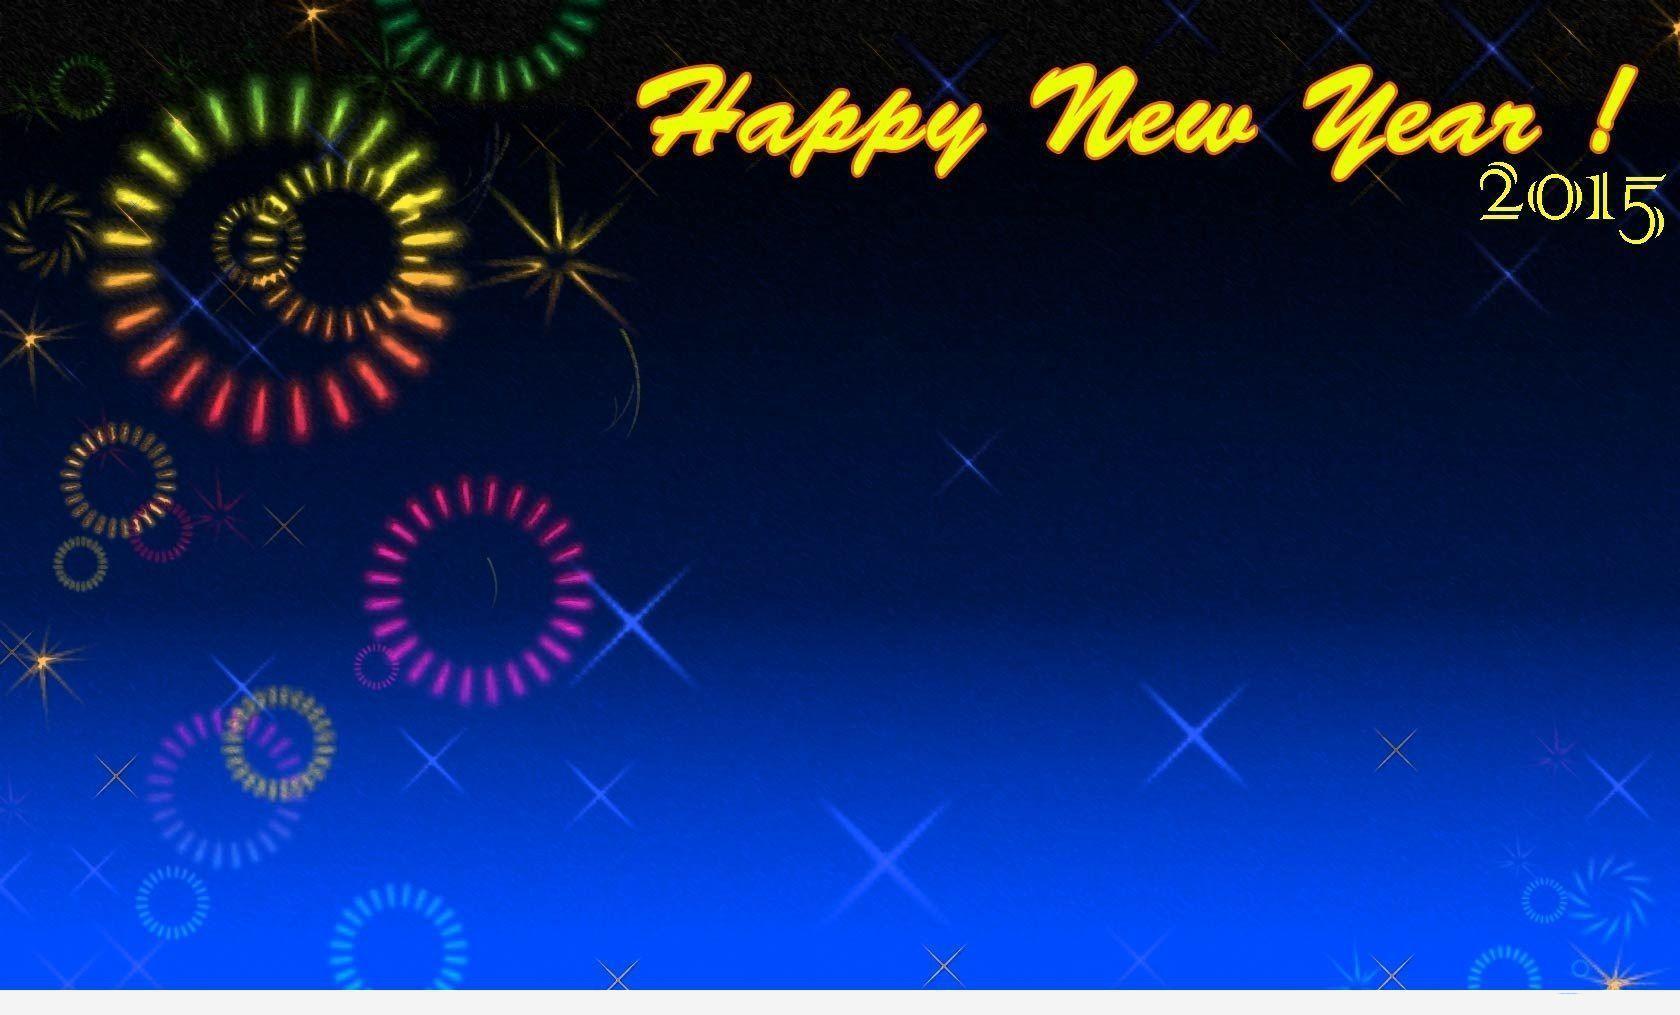 Welcome 2015 HD Wallpaper Happy New Year 2015 (3)